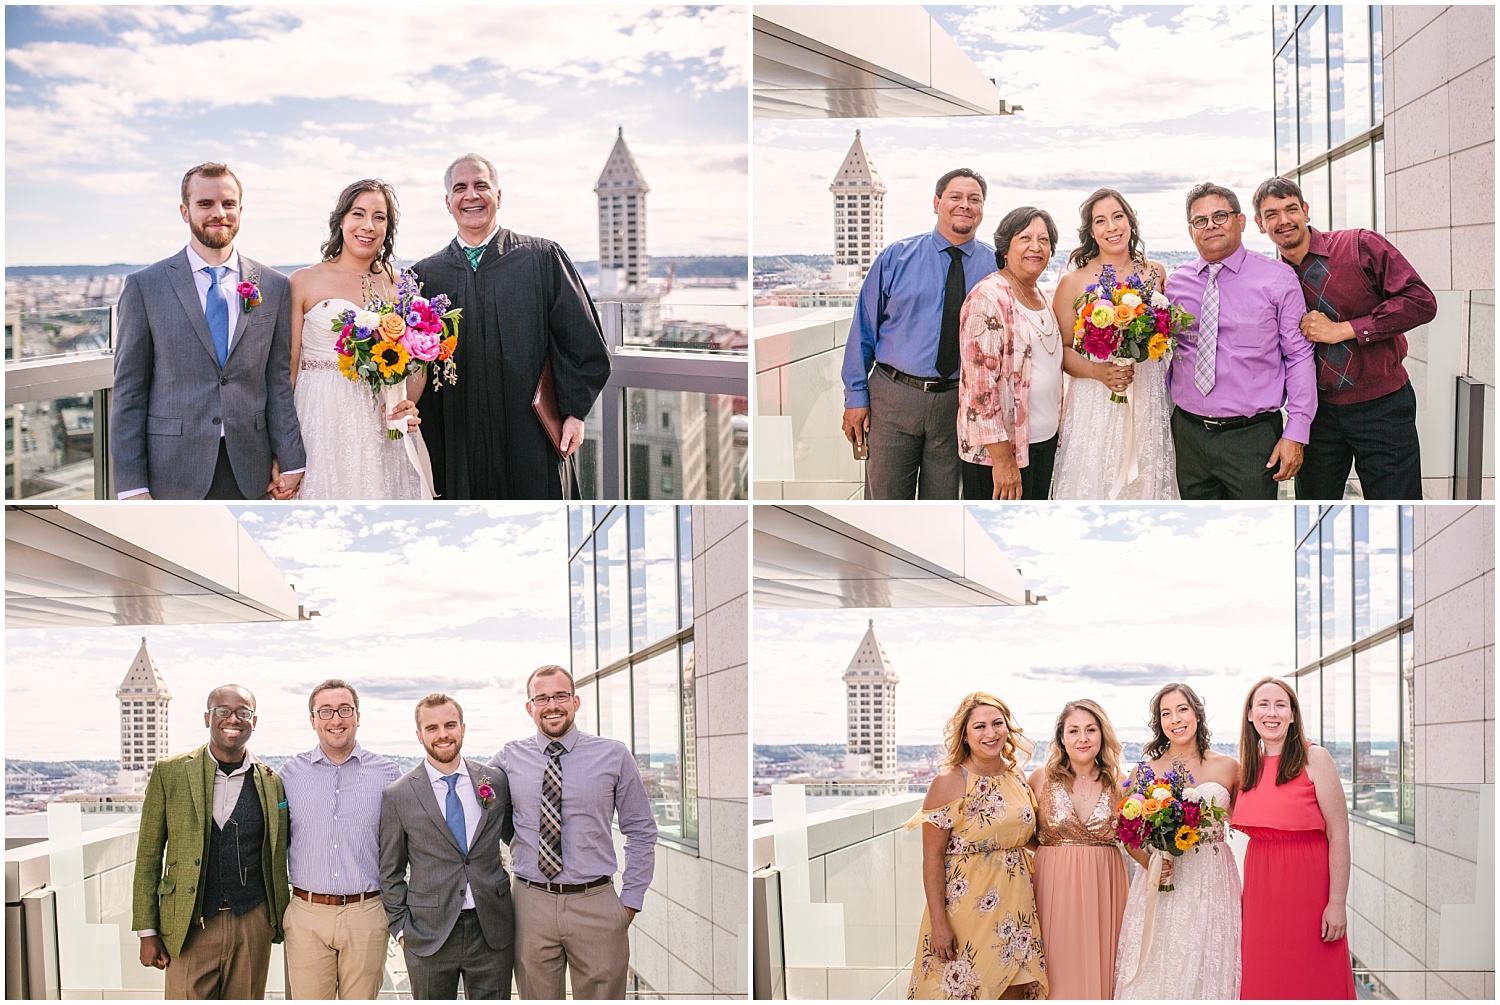 Group family photos at Seattle Municipal Court wedding on the rooftop.